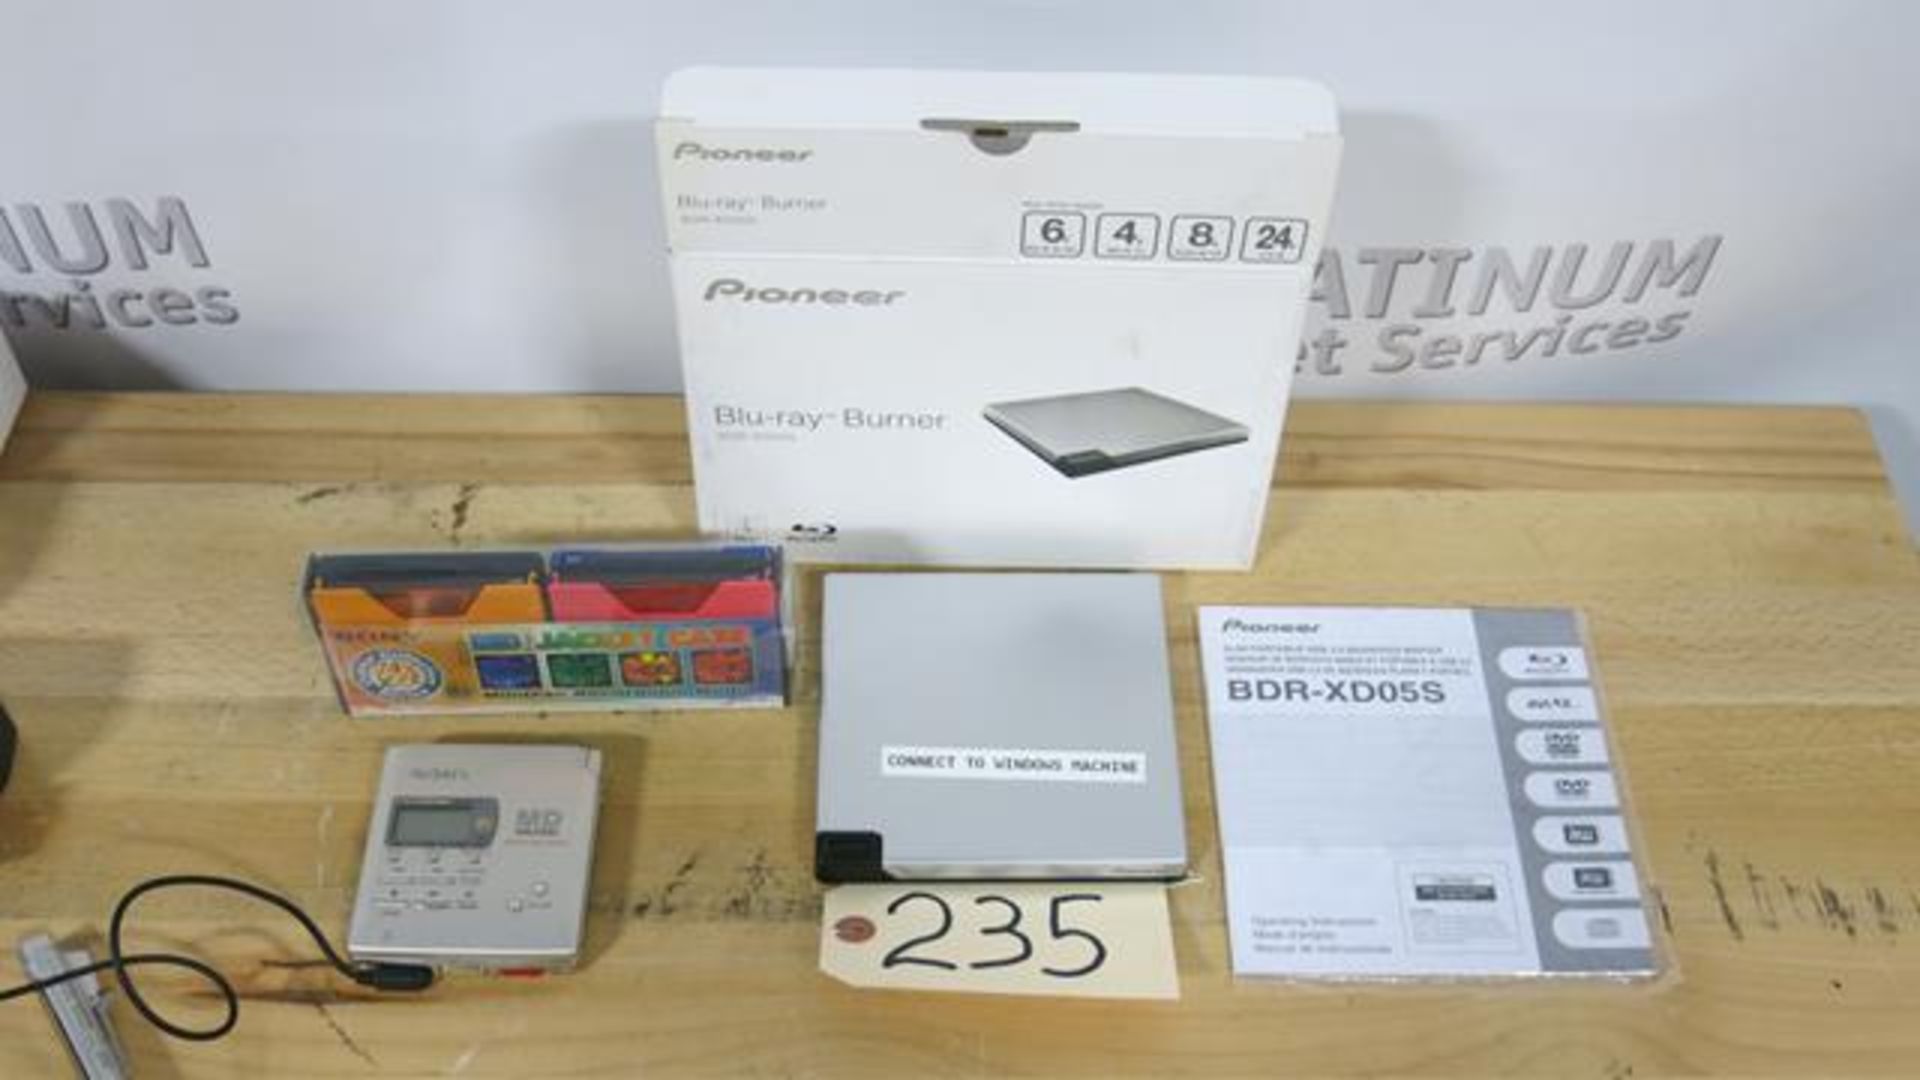 LOT OF SONY, PORTABLE MINIDISC RECORDER, PIONEER, BDR-XD05S, PORTABLE CD/DVD WRITER AND SONY,